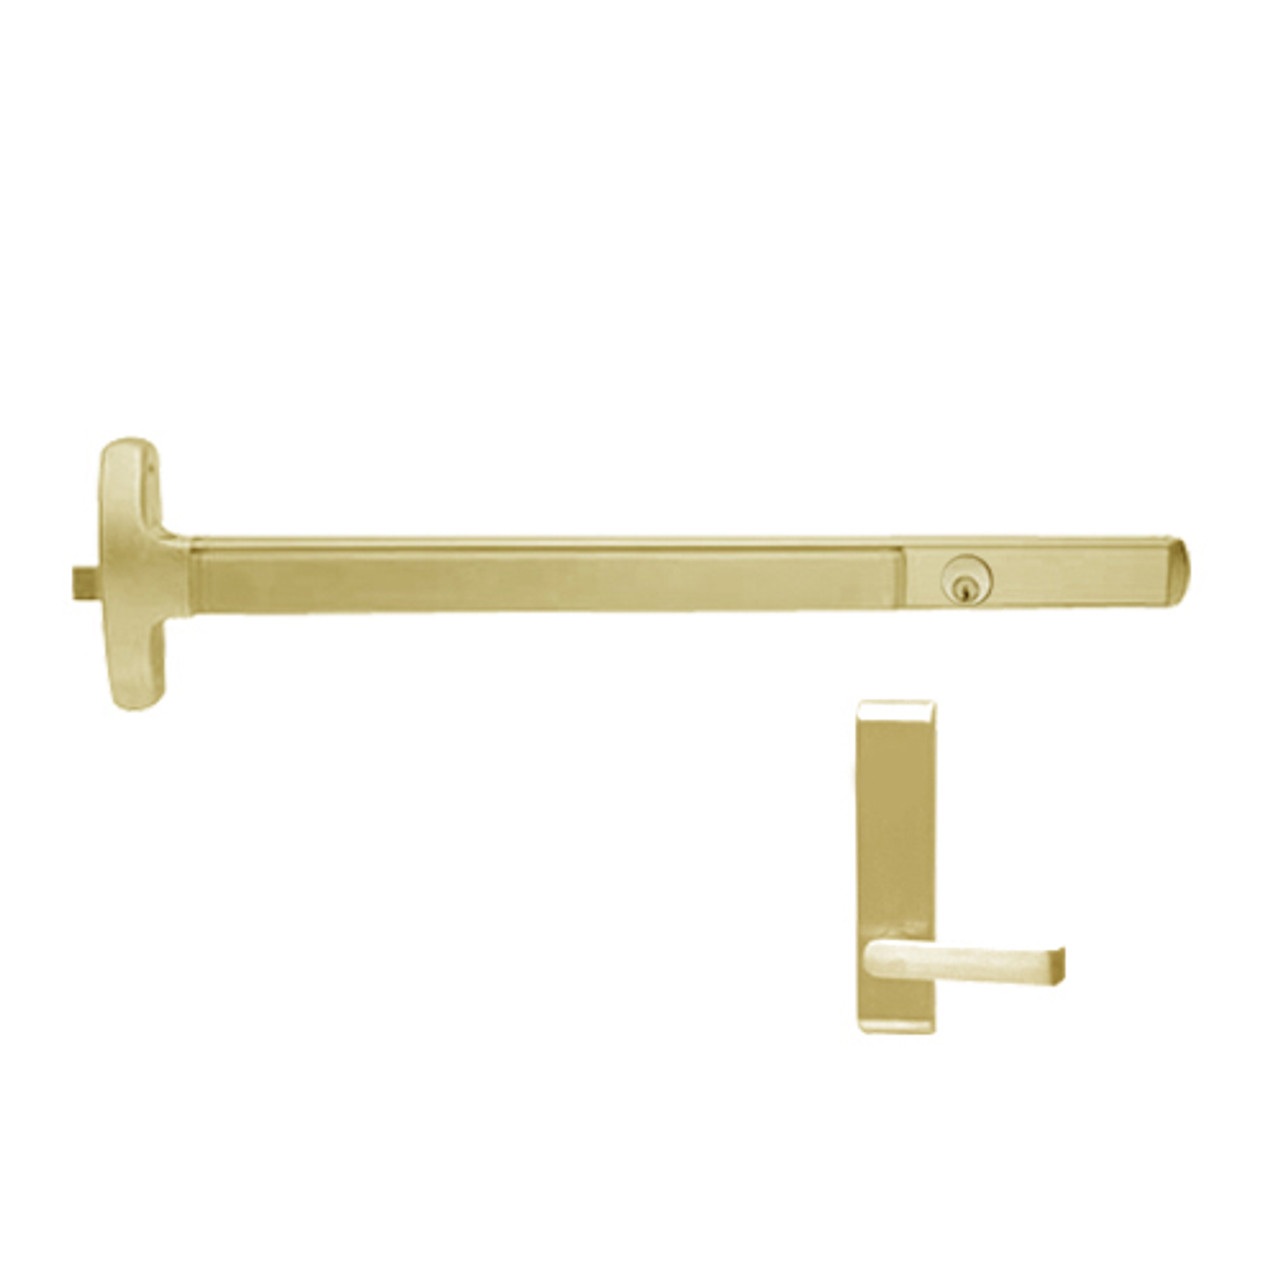 CD24-R-L-DT-DANE-US4-4-LHR Falcon Exit Device in Satin Brass